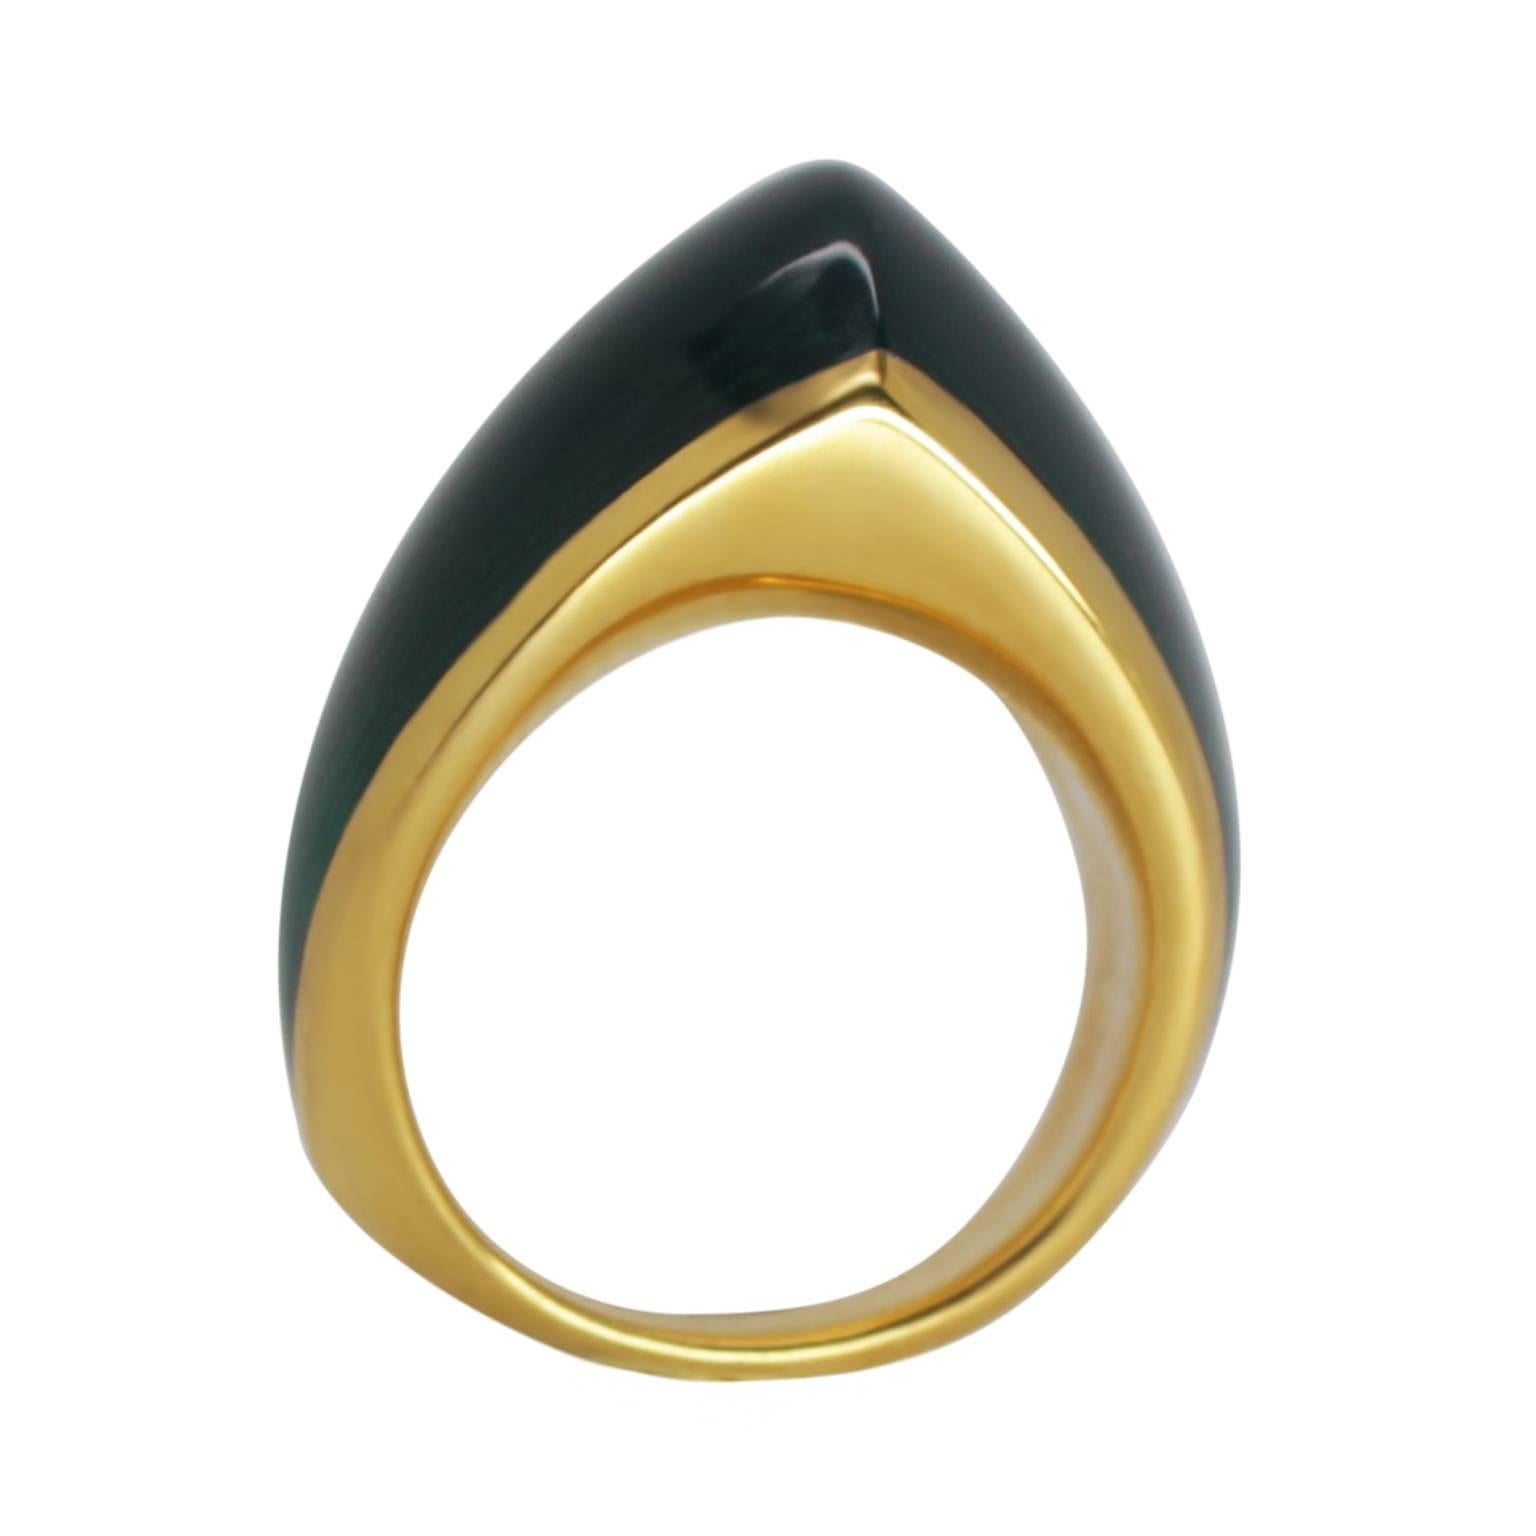 The Libertine ring has become a loved design and continues to be a real favourite. Both bold in colour and size it look amazing on and is very comfortable and tactile.  When the light hits the translucent cold enamel it reflects a strong vibrant